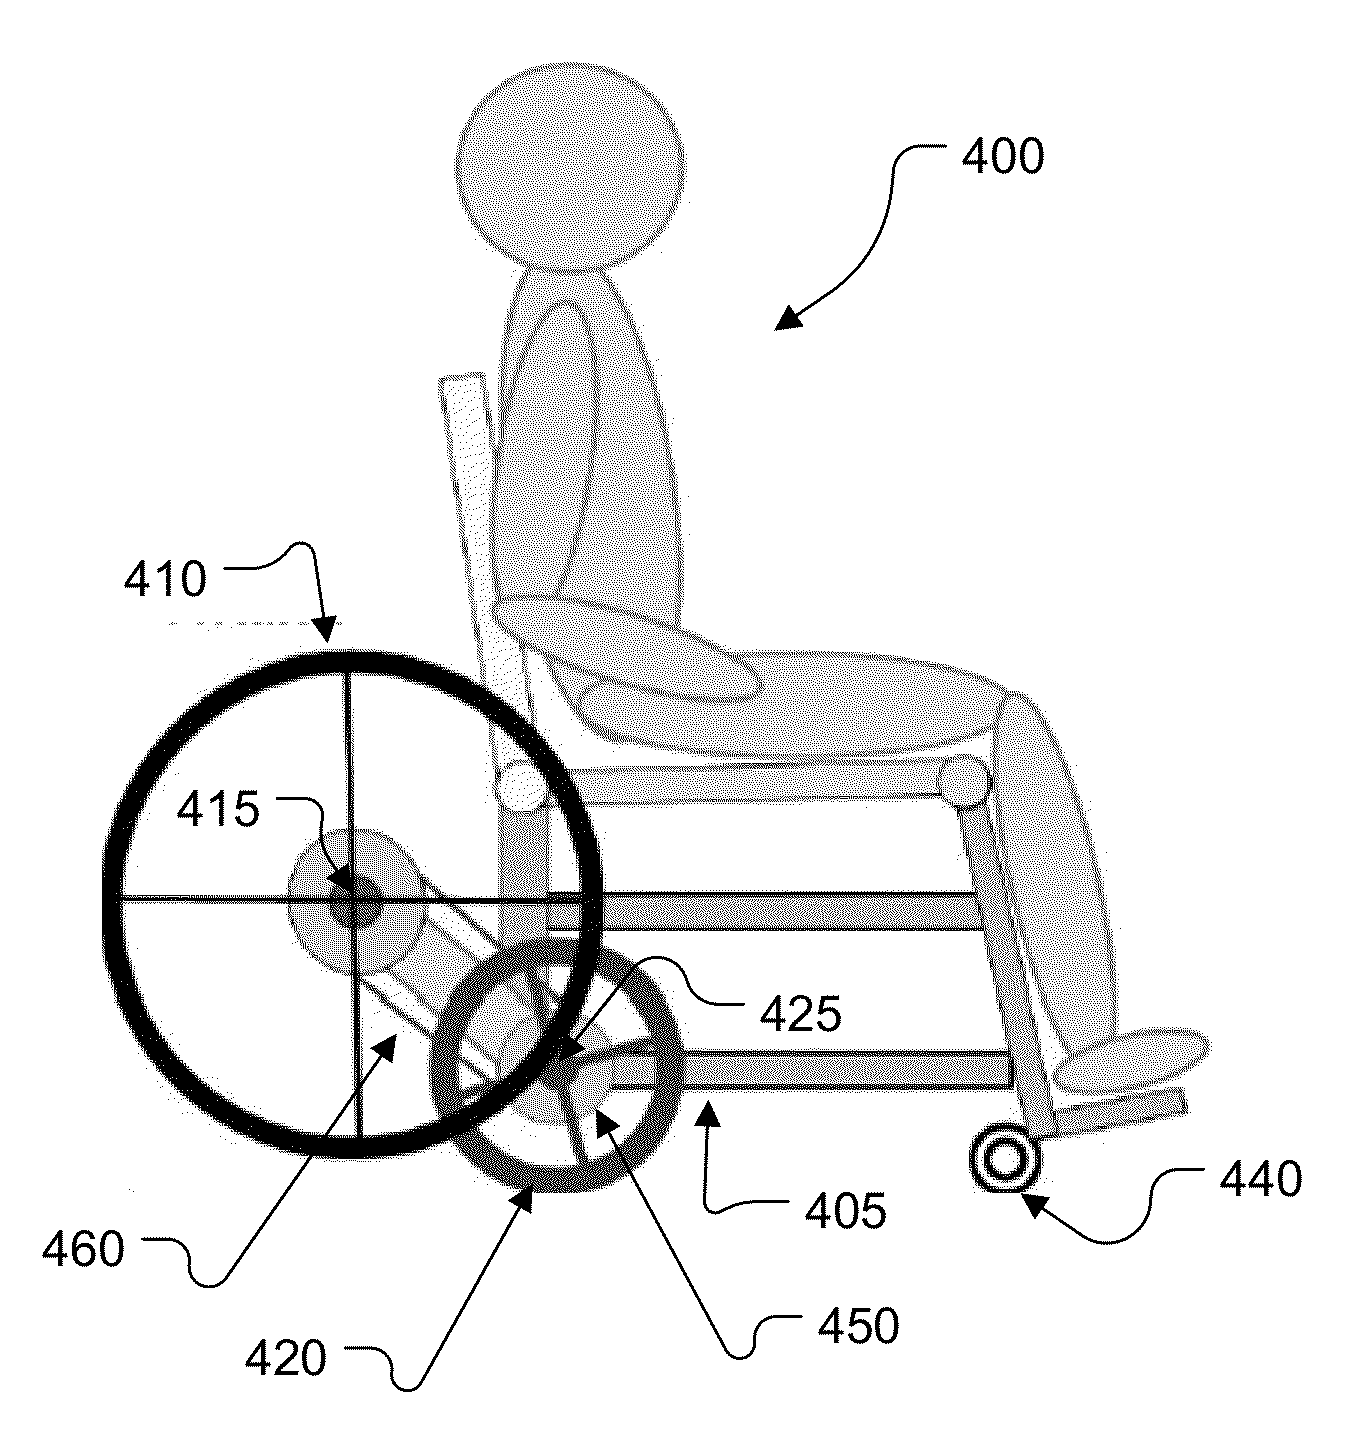 Manual wheelchair system for improved propulsion and transfers